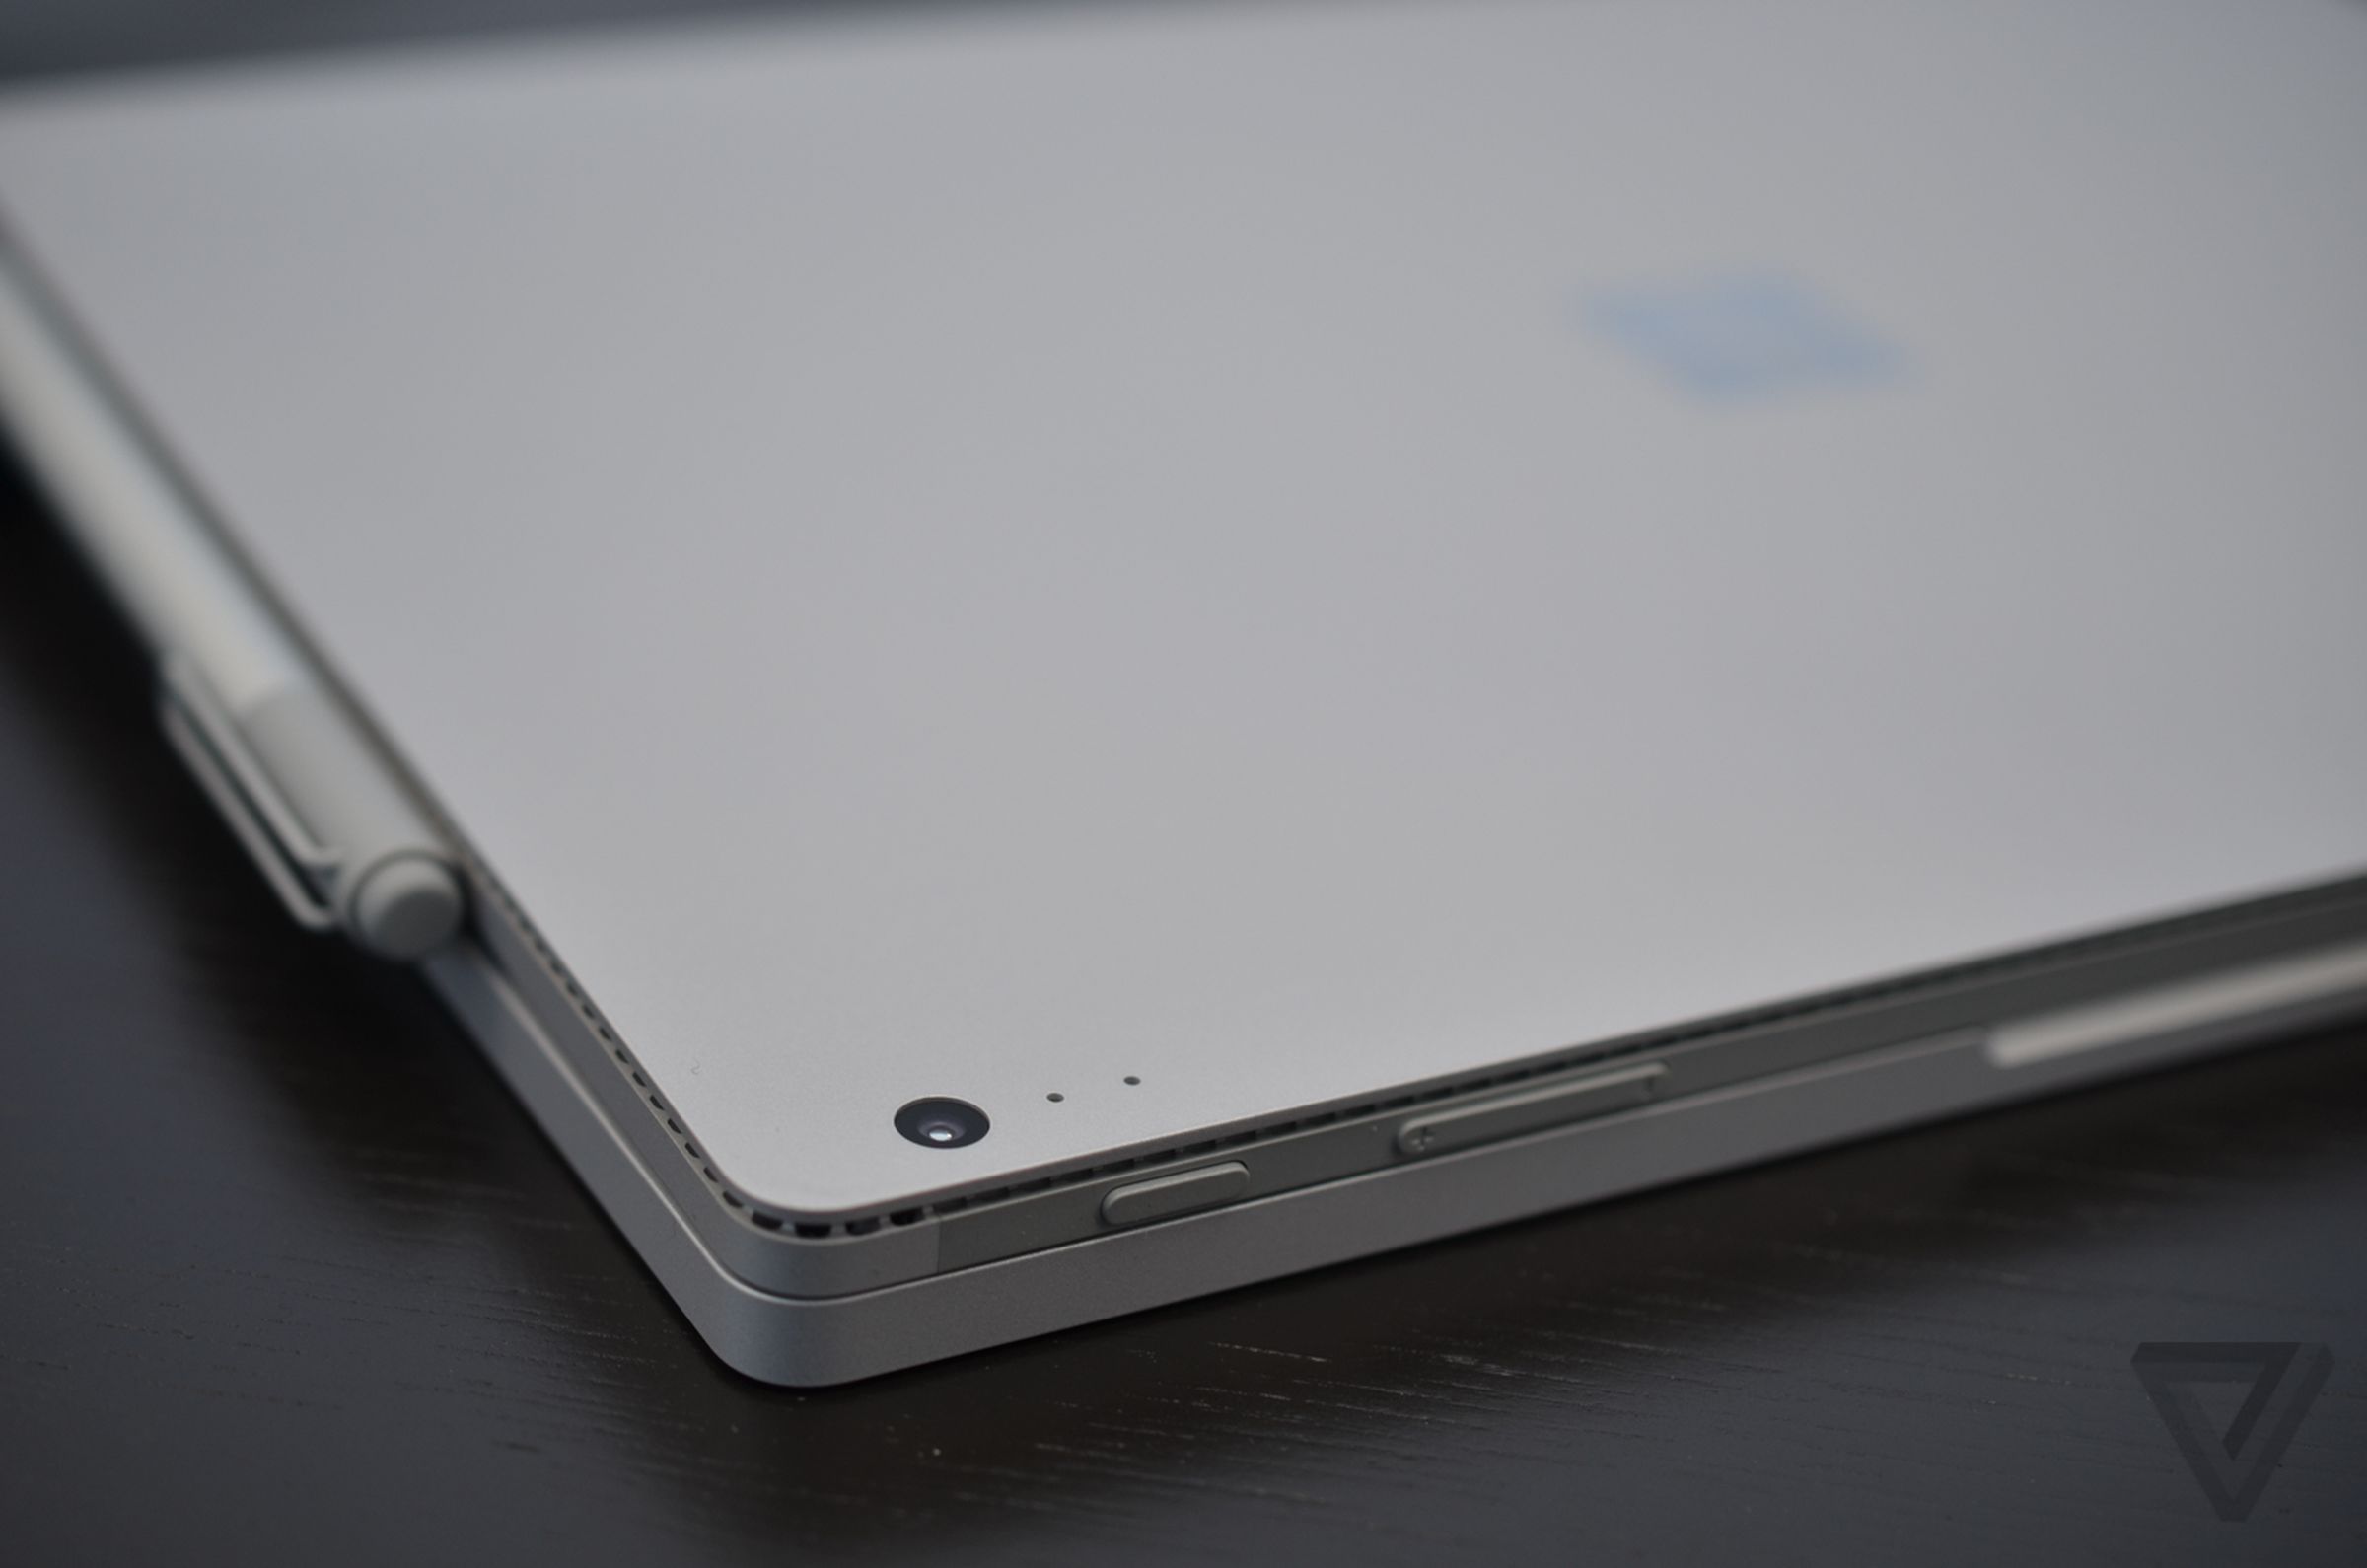 Microsoft Surface Book (2016) hands-on photos